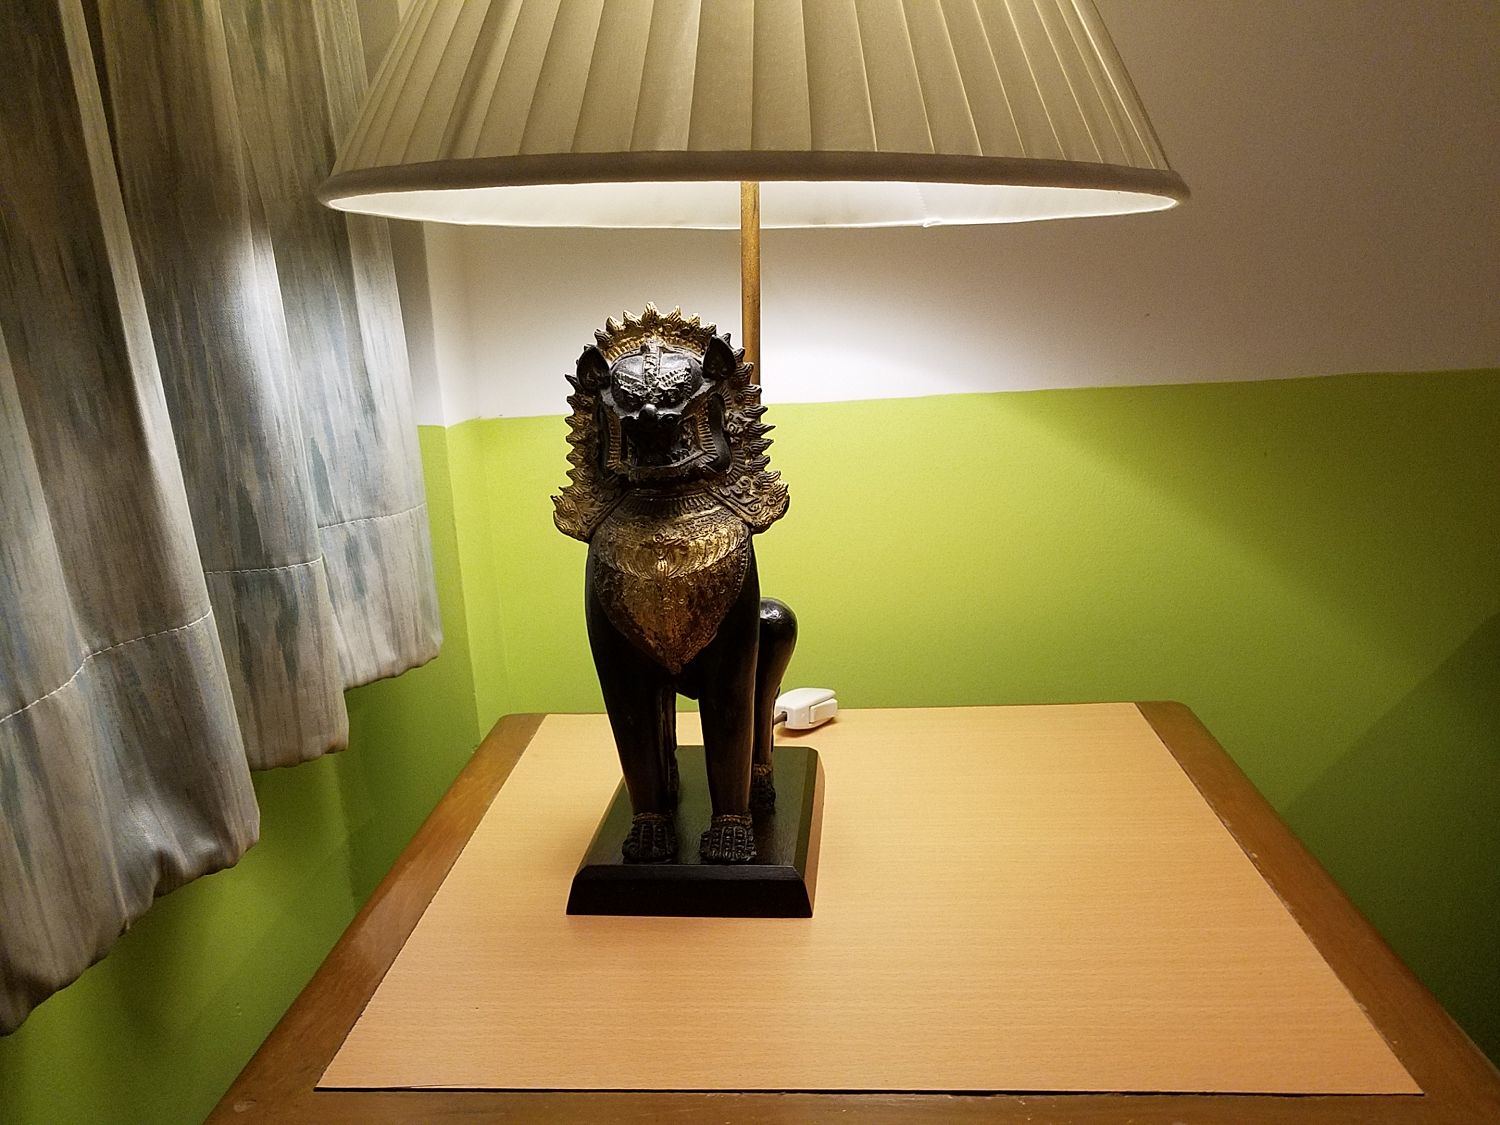 Our cool desk lamp in our hotel room